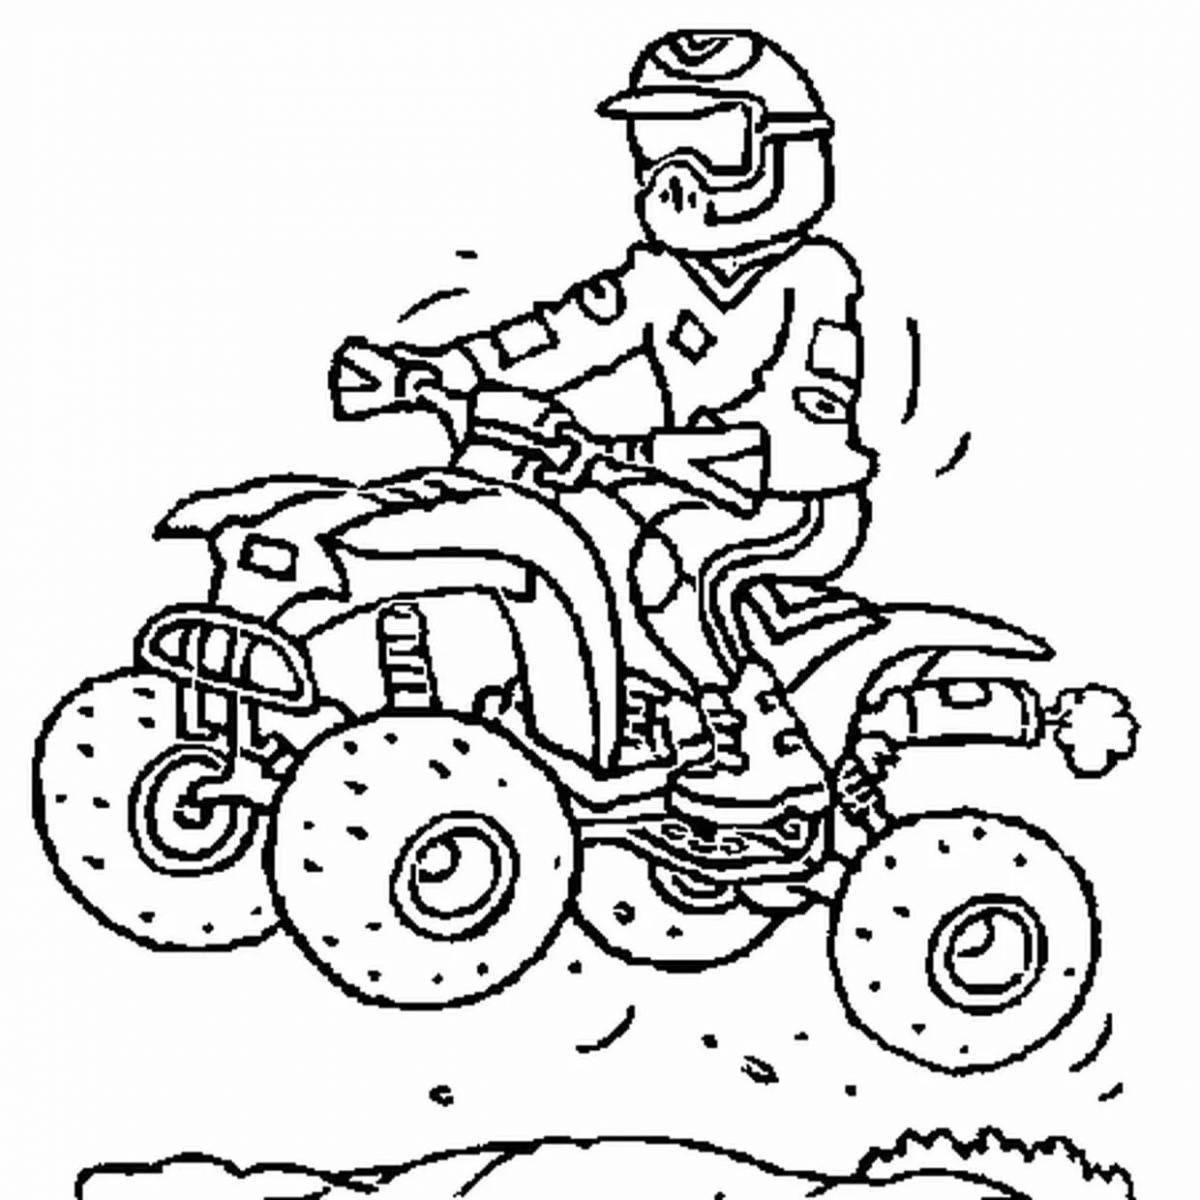 Bold ATV coloring page for boys